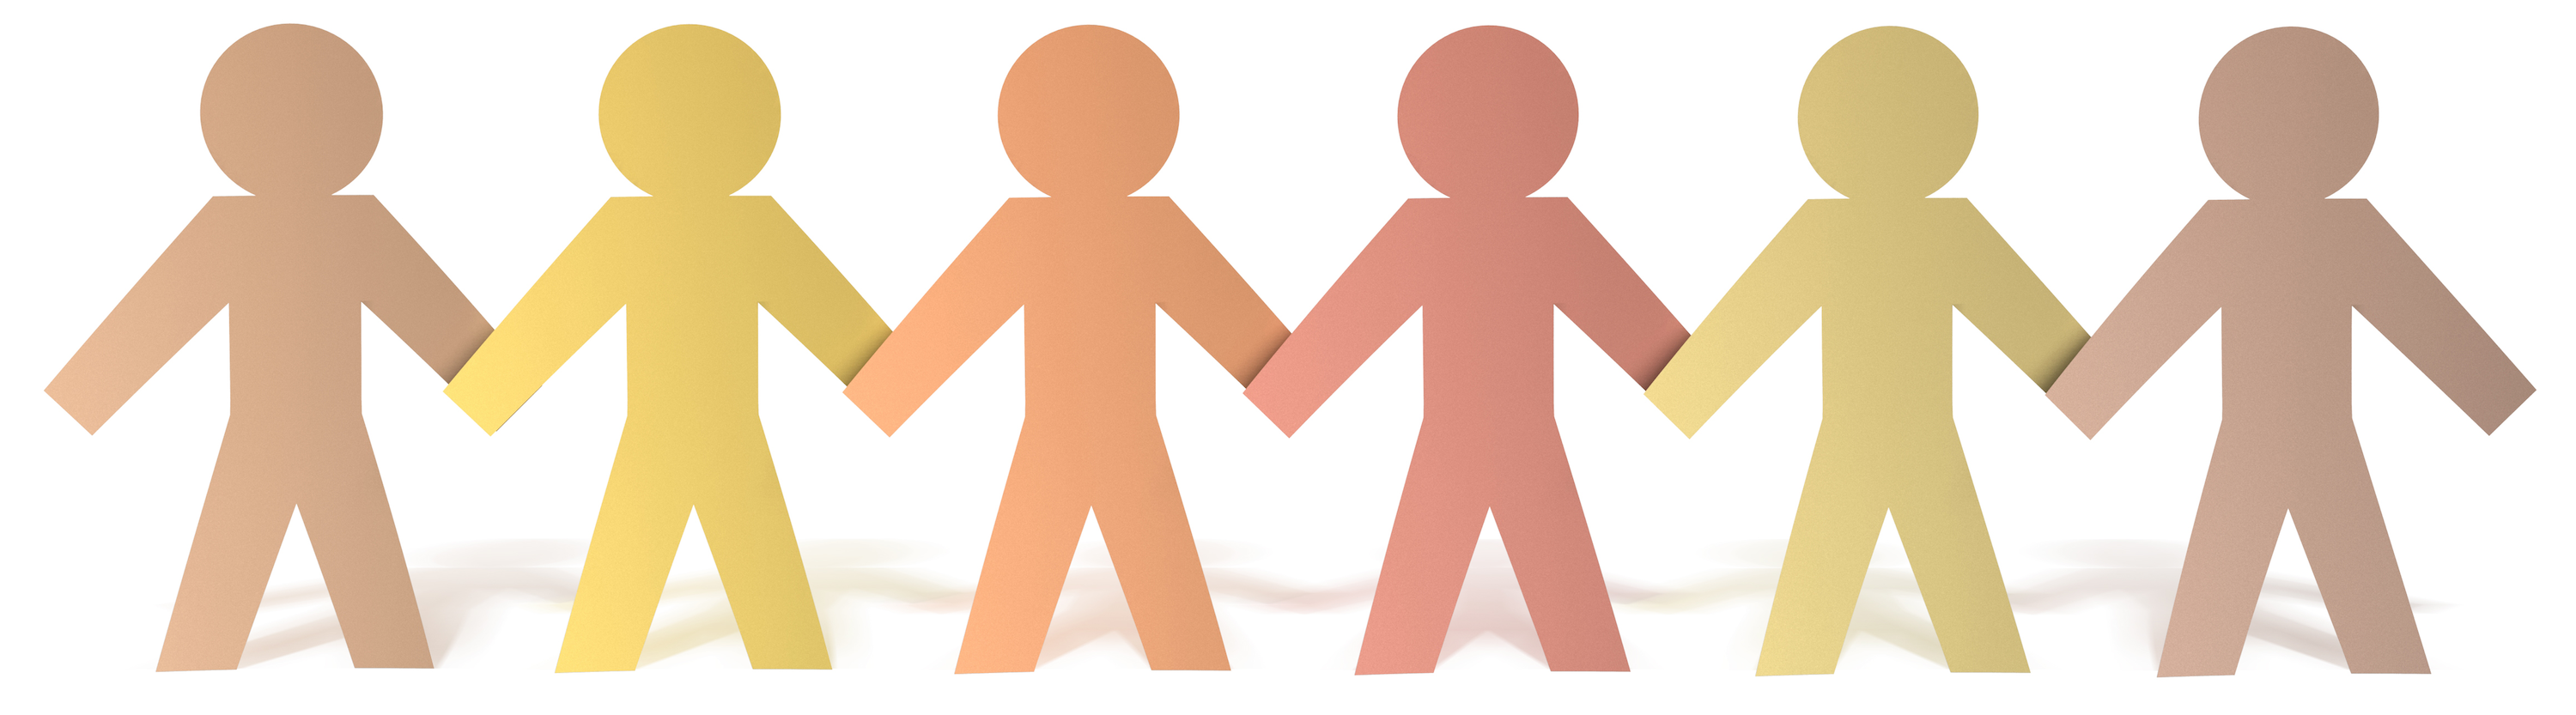 Stick People Holding Hands.png - Hands Holding, Transparent background PNG HD thumbnail